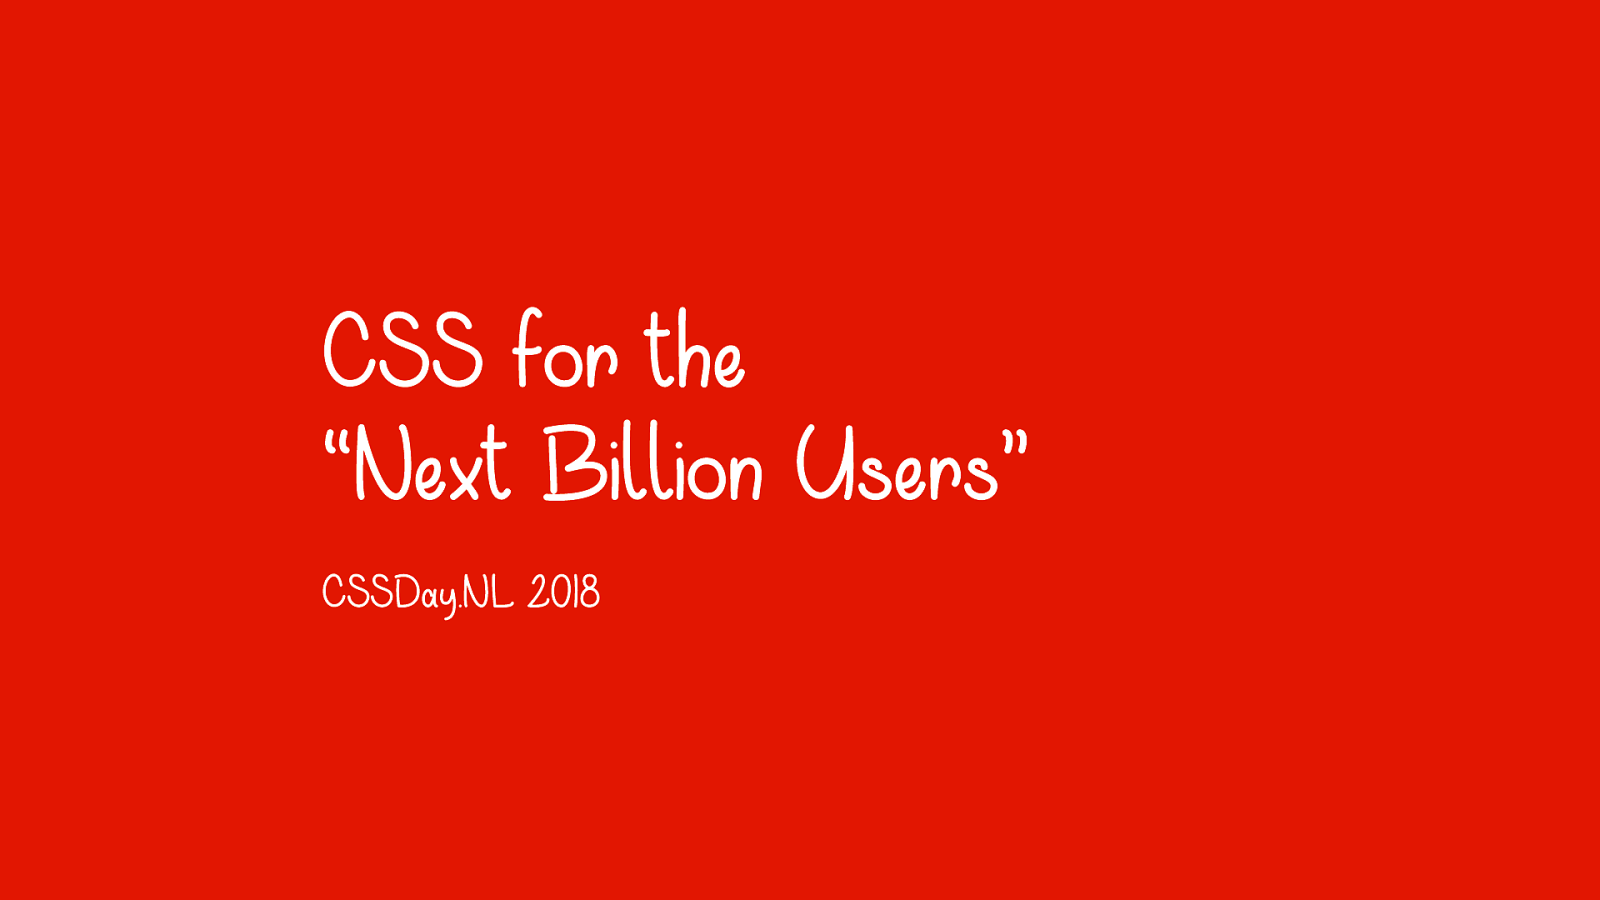 CSS for the Next Billion Users by Ire Aderinokun